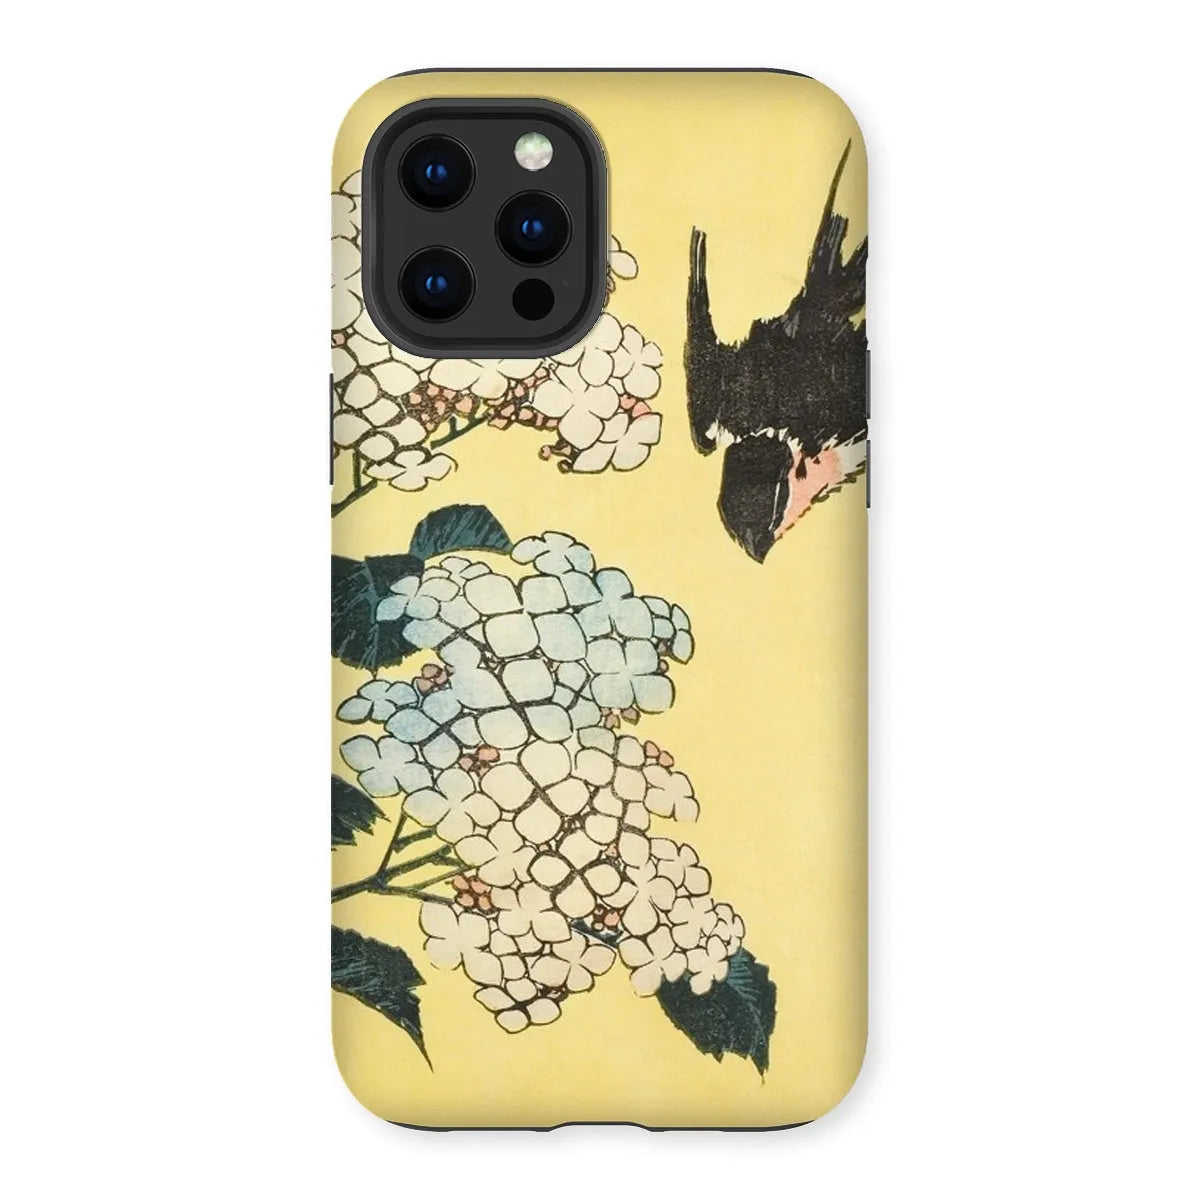 Hydrangea And Swallow - Japanese Art Phone Case - Hokusai - Iphone 12 Pro Max / Matte - Mobile Phone Cases - Aesthetic